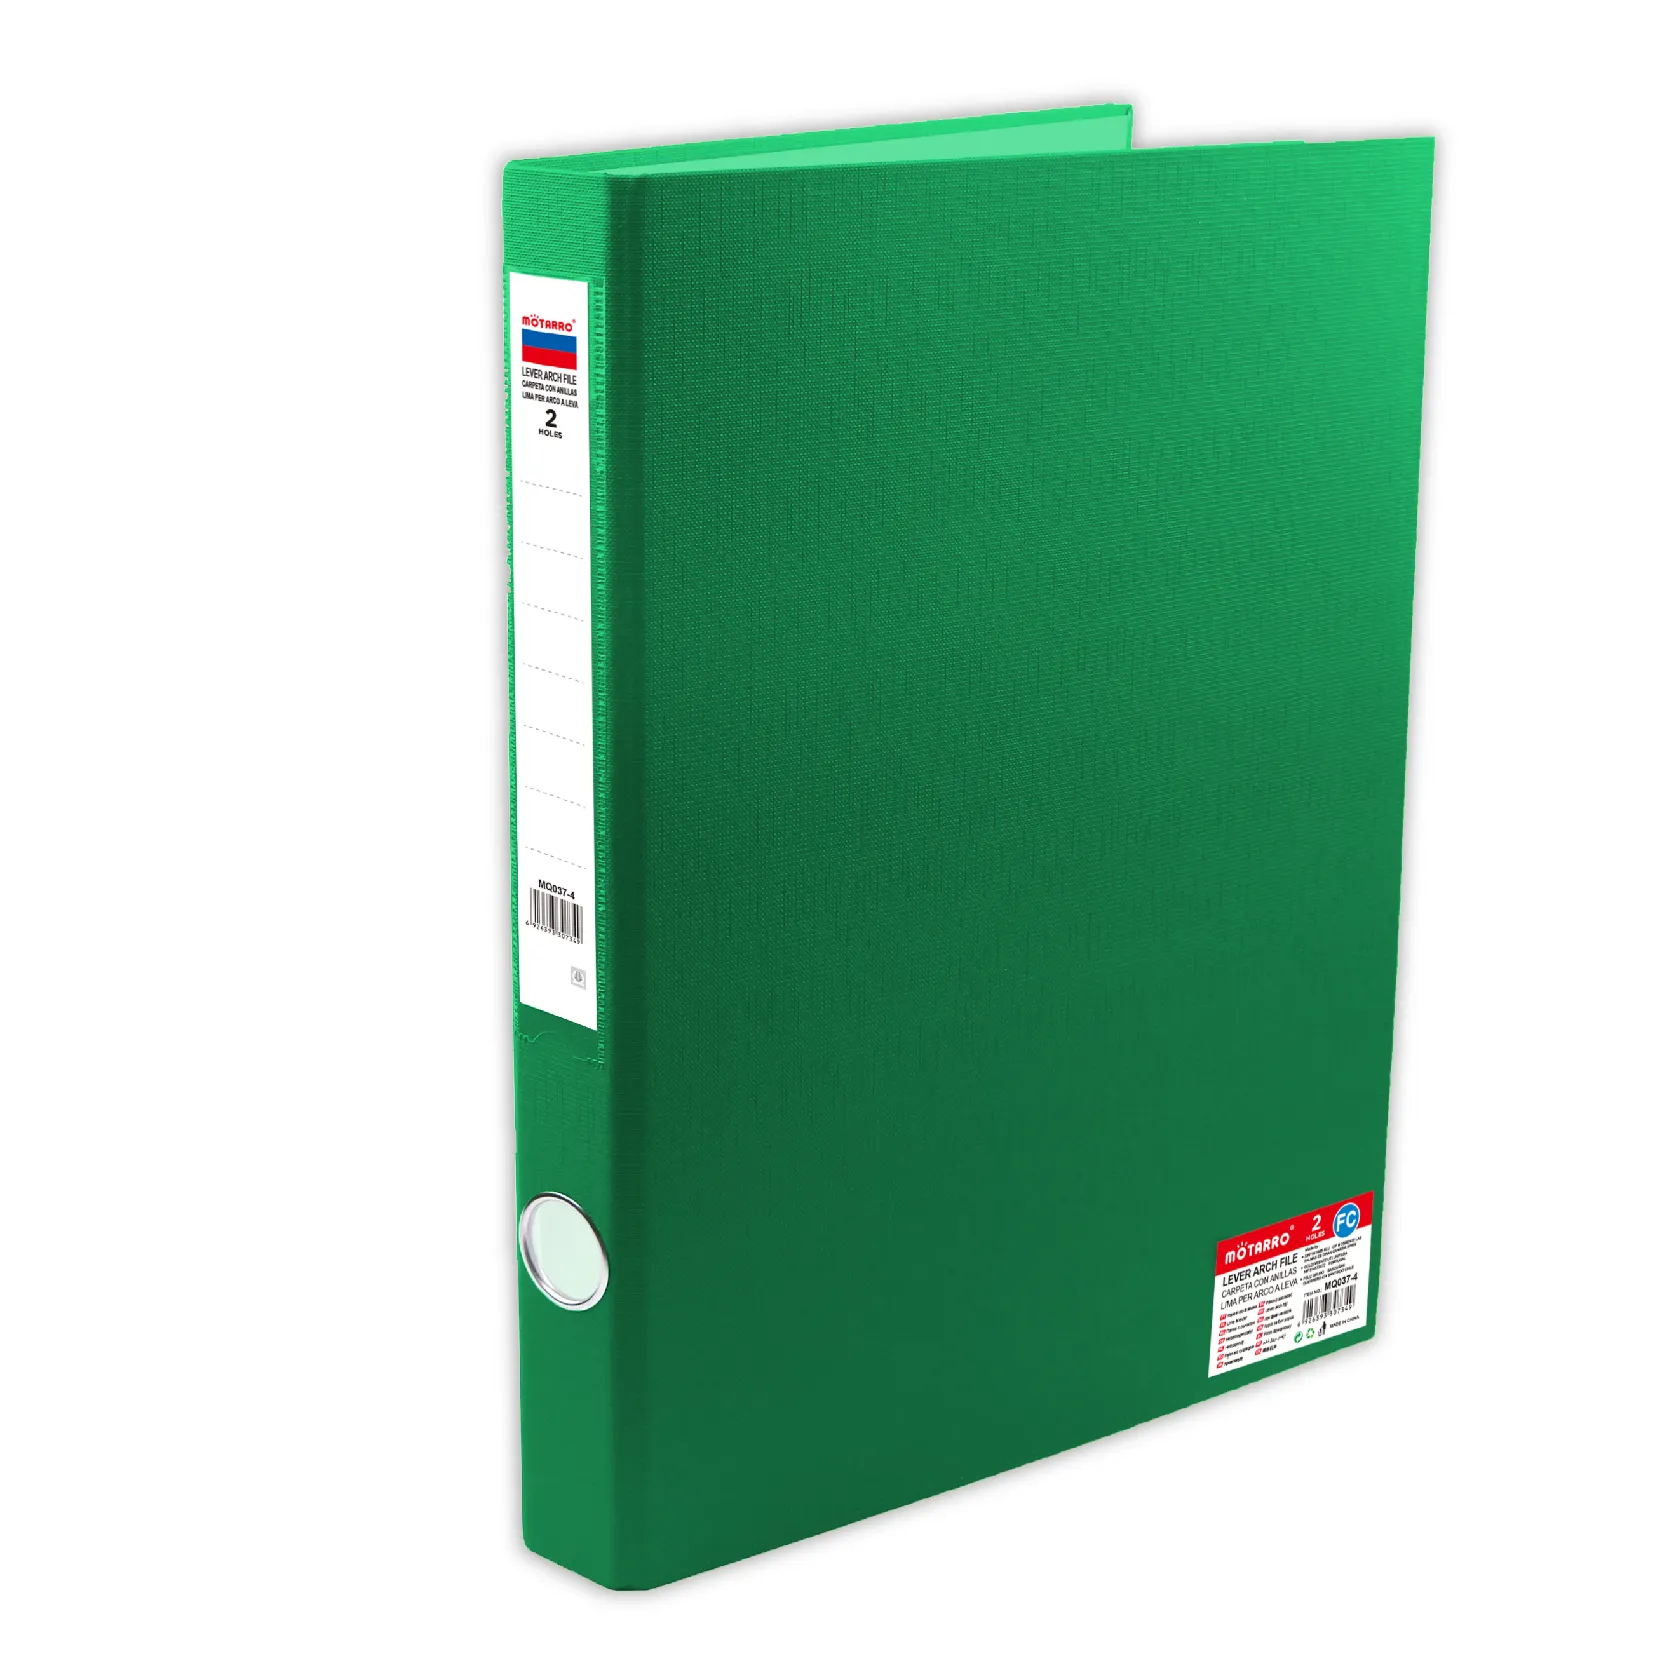 New Product Office Green Box File Lever Arch File Folder 2 Holes Metal Clip Folder For Document